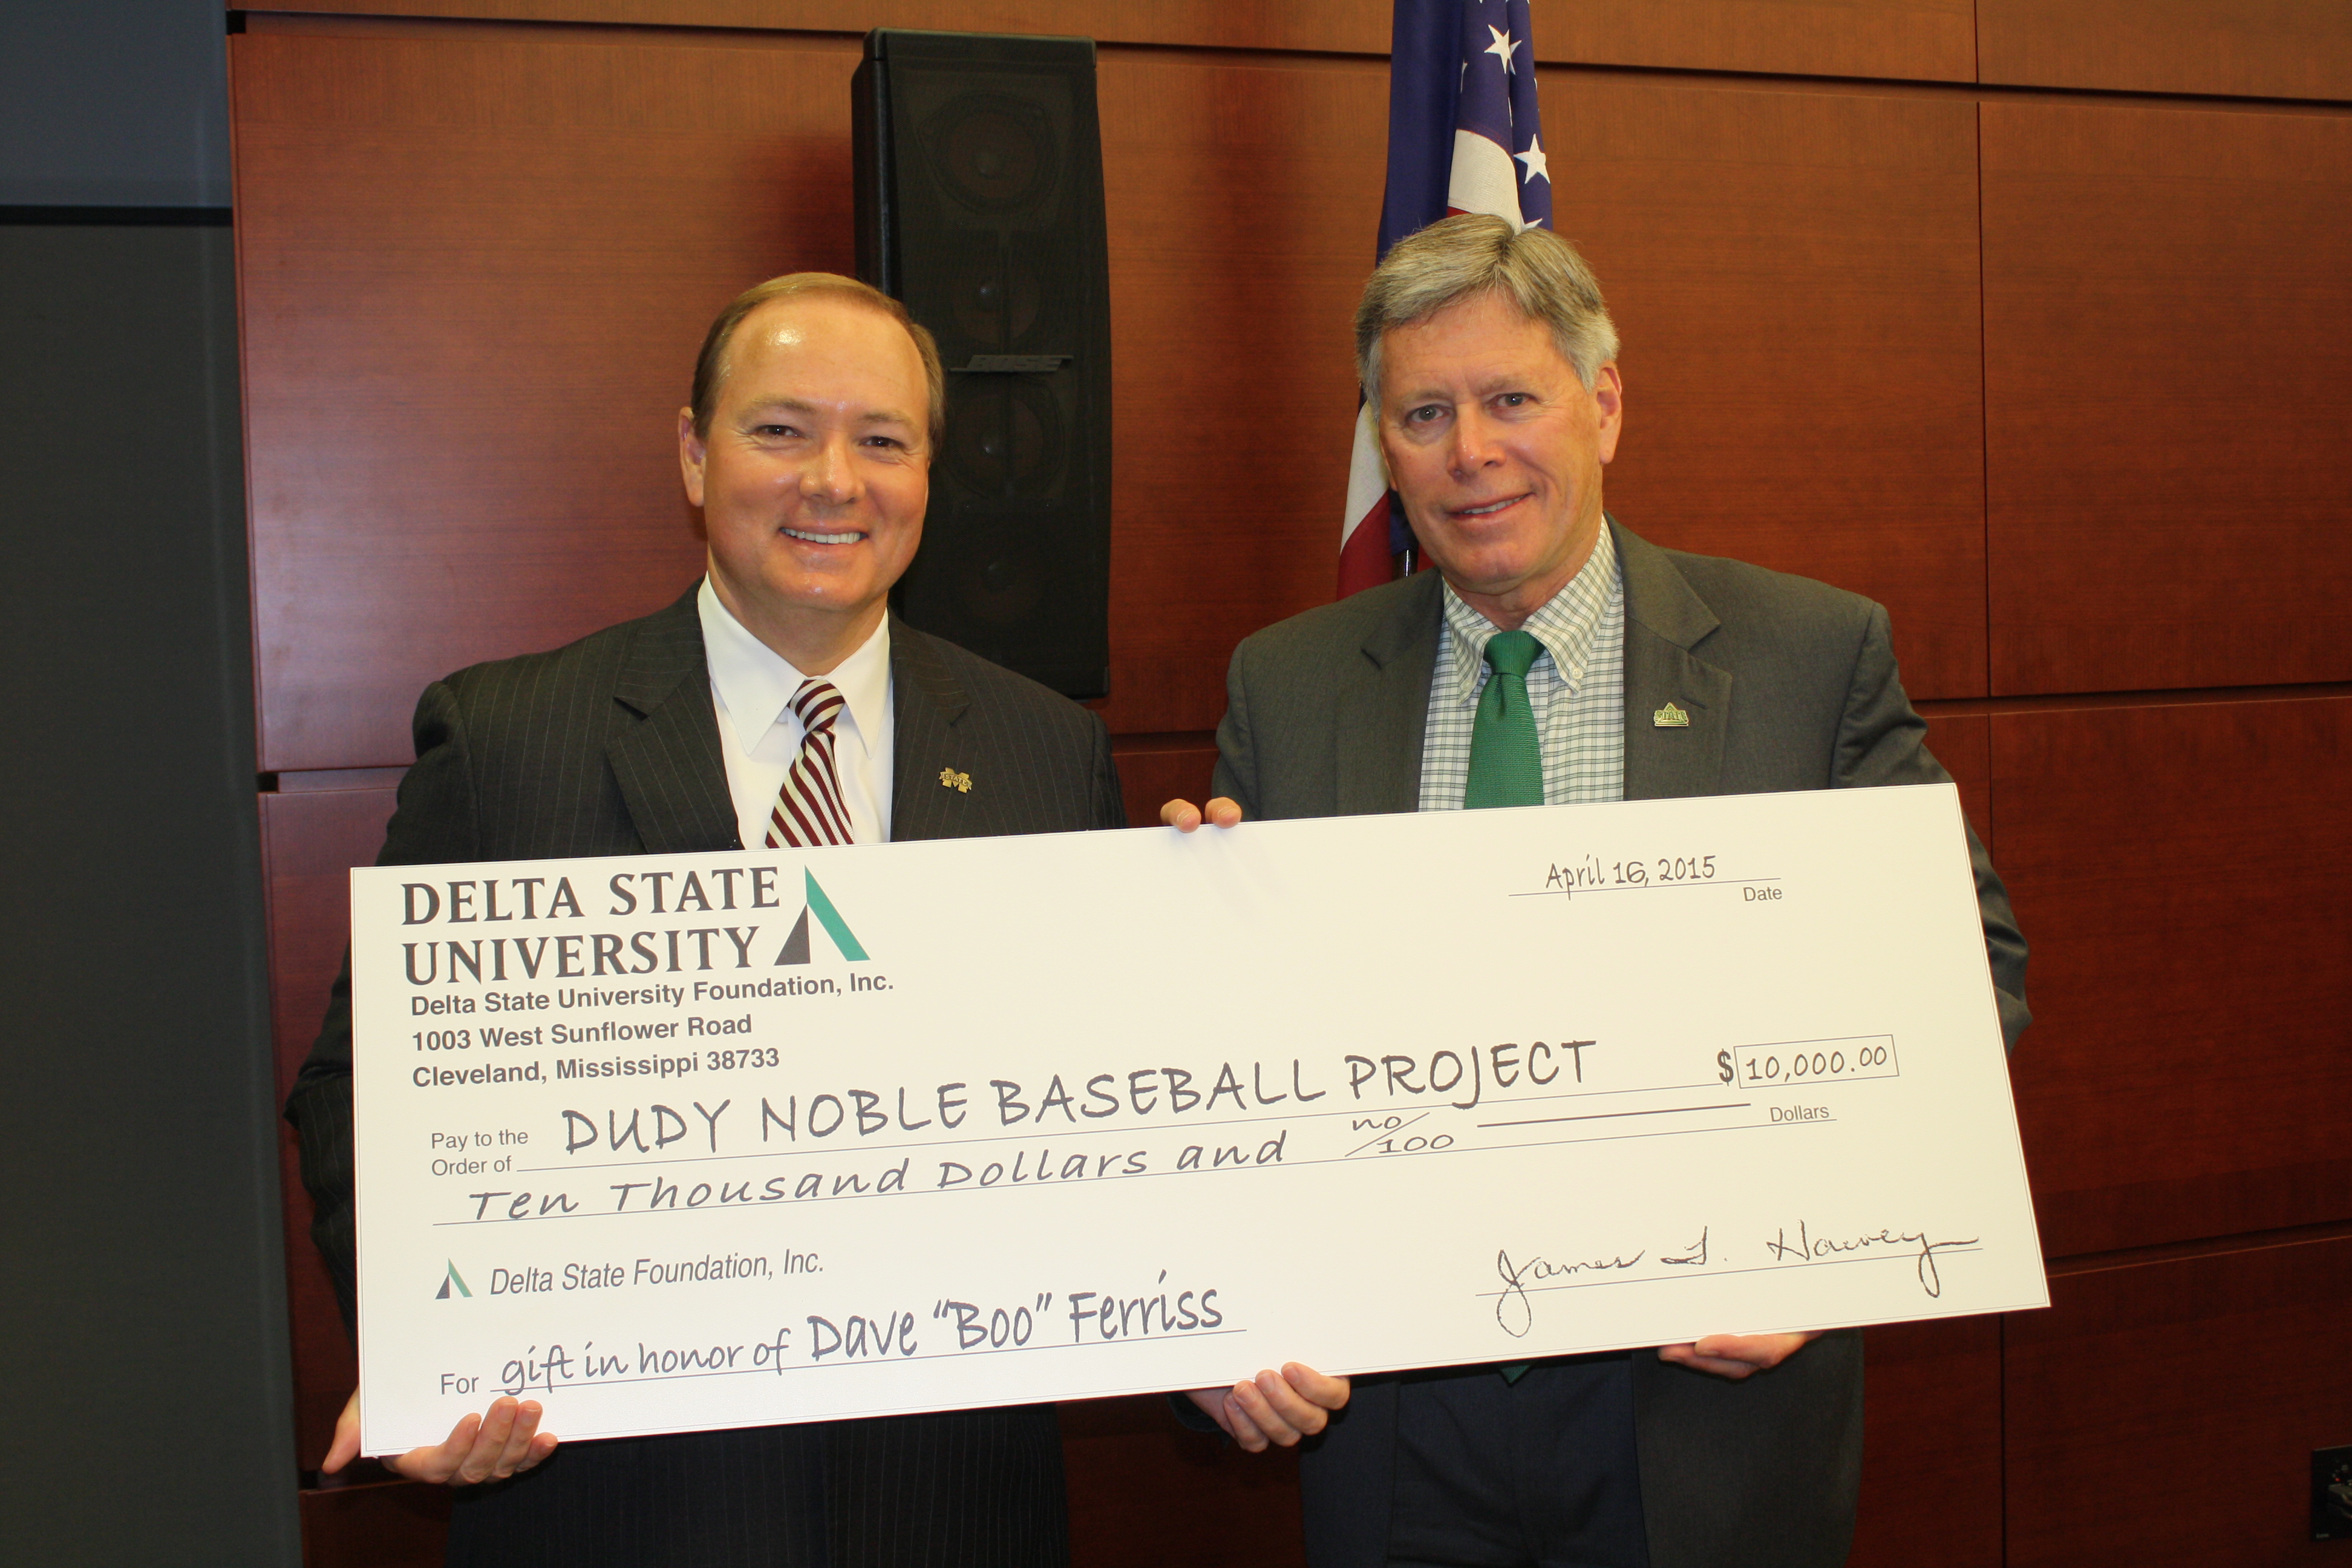 Delta State University President William N. LaForge, right, presented a donation from the DSU Foundation to Mississippi State University's Dudy Noble stadium baseball project to MSU President Mark E. Keenum, left, prior to Thursday's meeting of the state College Board in Jackson. The gift honors former MSU baseball great and longtime DSU coach and administrator David M. "Boo" Ferriss. Ferriss was MSU's first scholarship baseball player and went on to a remarkable career in Major League Baseball with the Boston Red Sox.